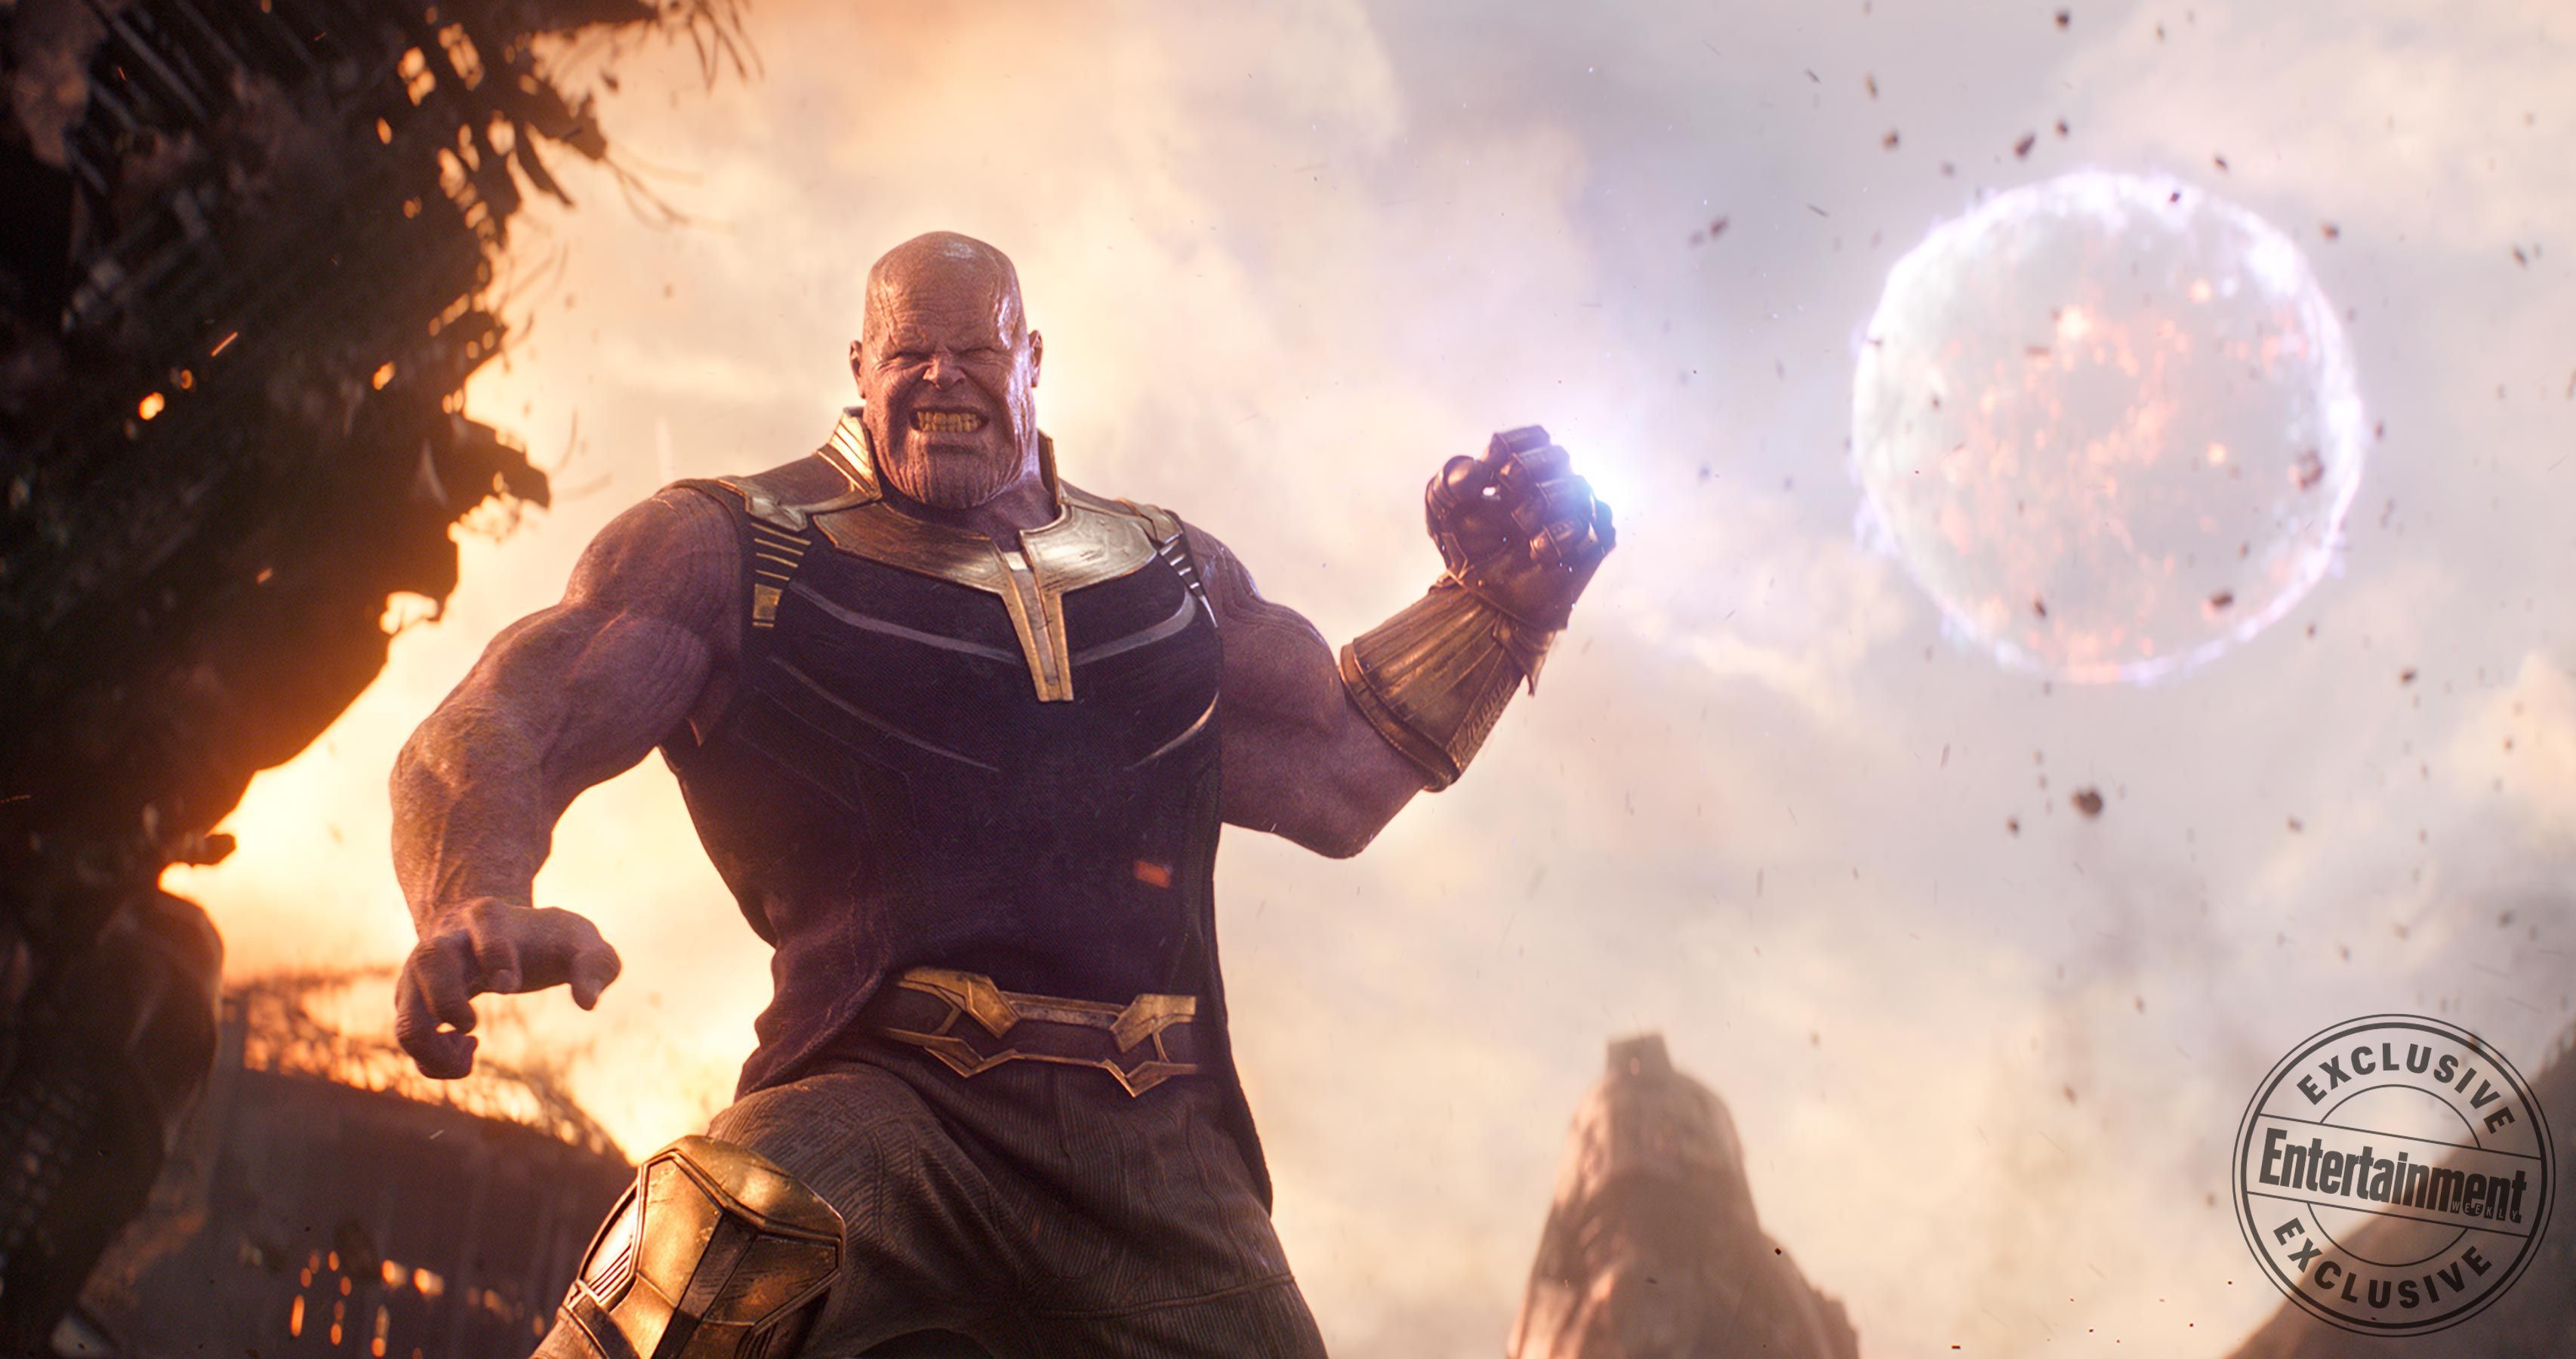 new image from 'Avengers: Infinity War' include Thanos throwing